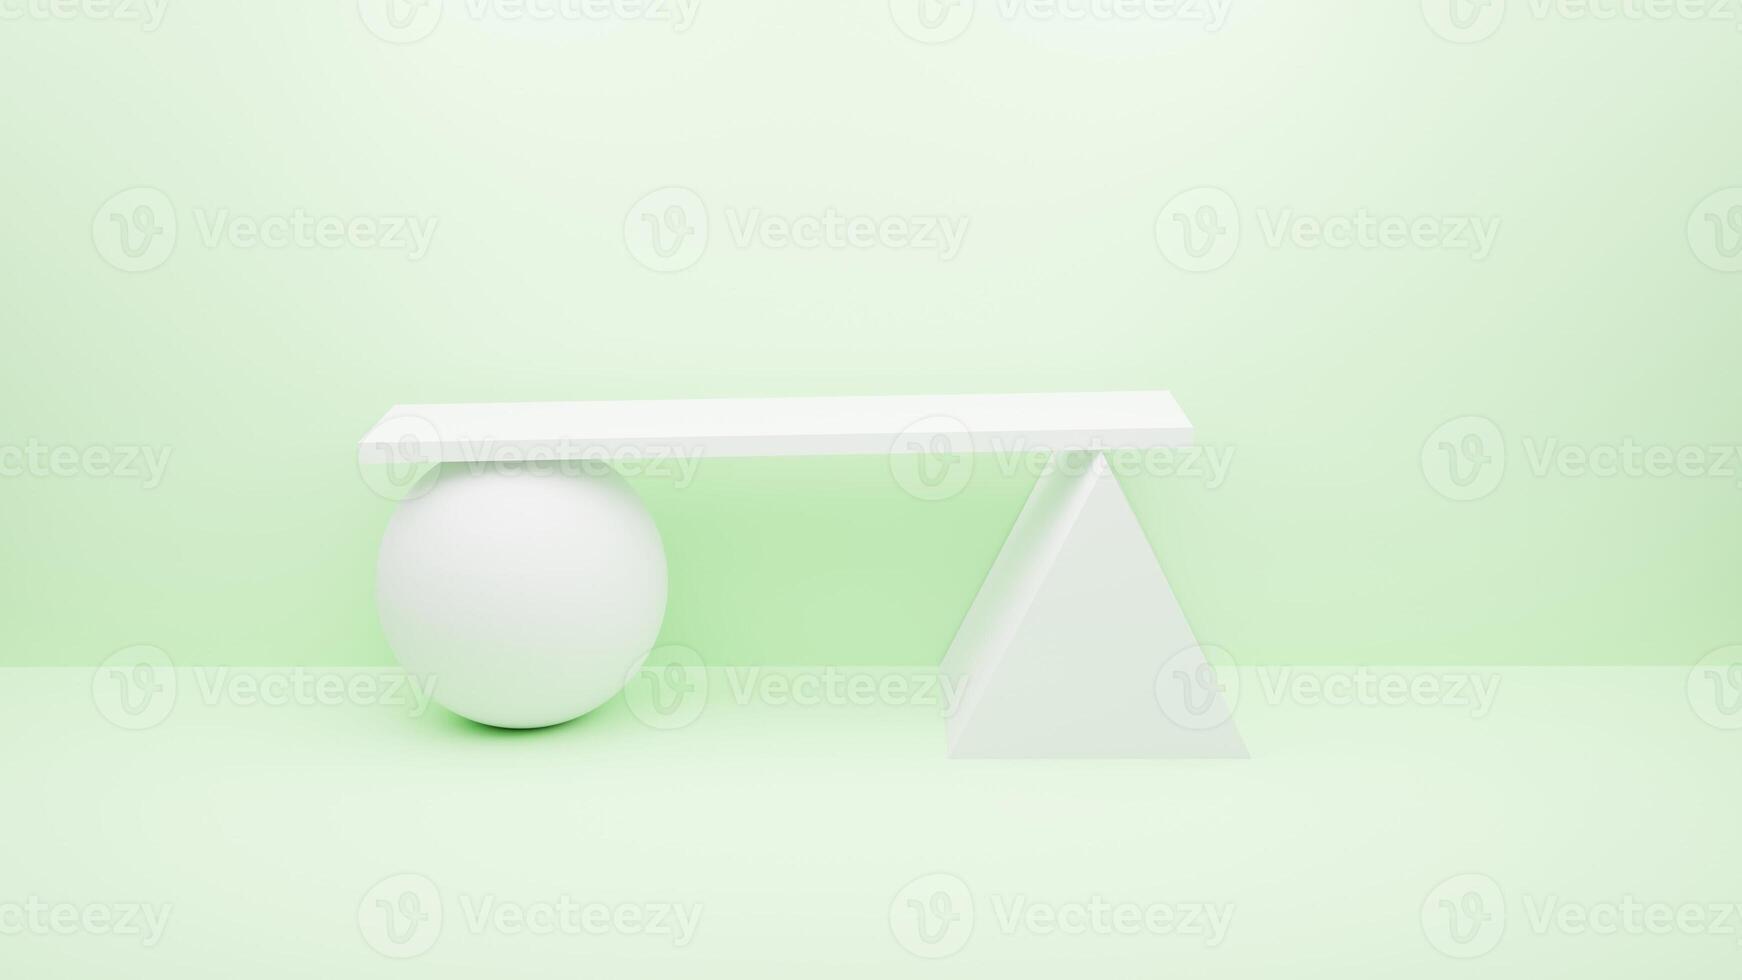 An empty white podium held by a sphere and a pyramid on a light green photo